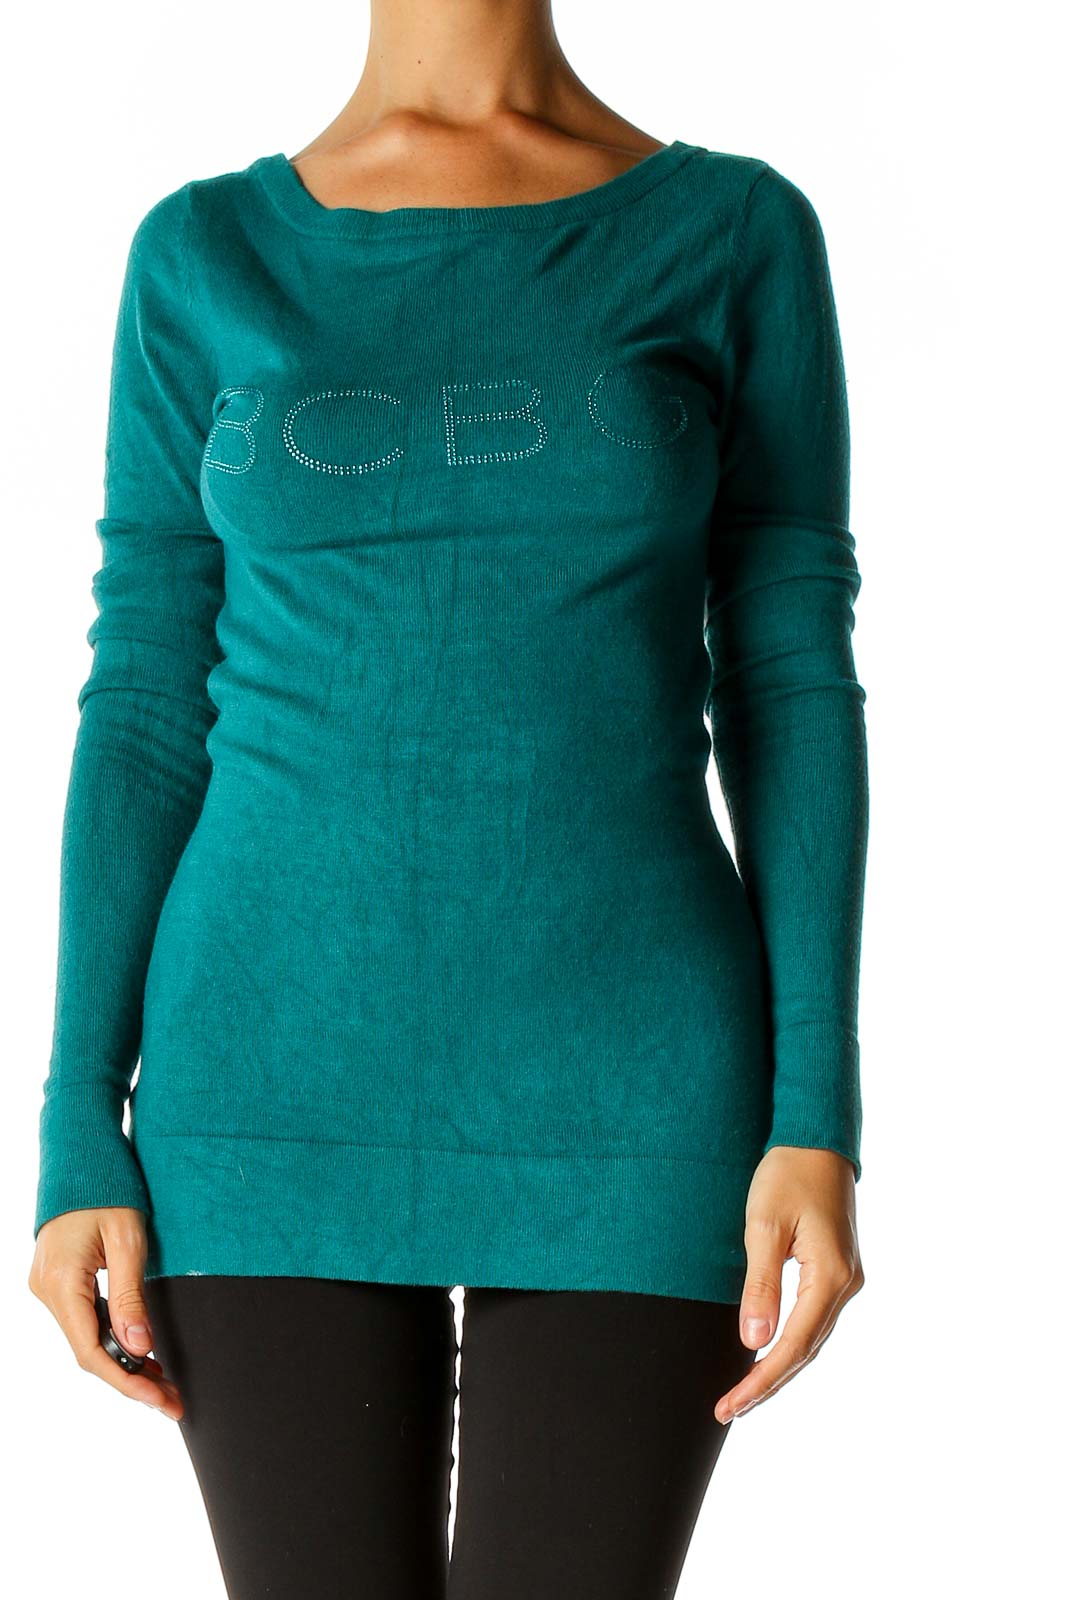 Green Solid Chic Sweater Front